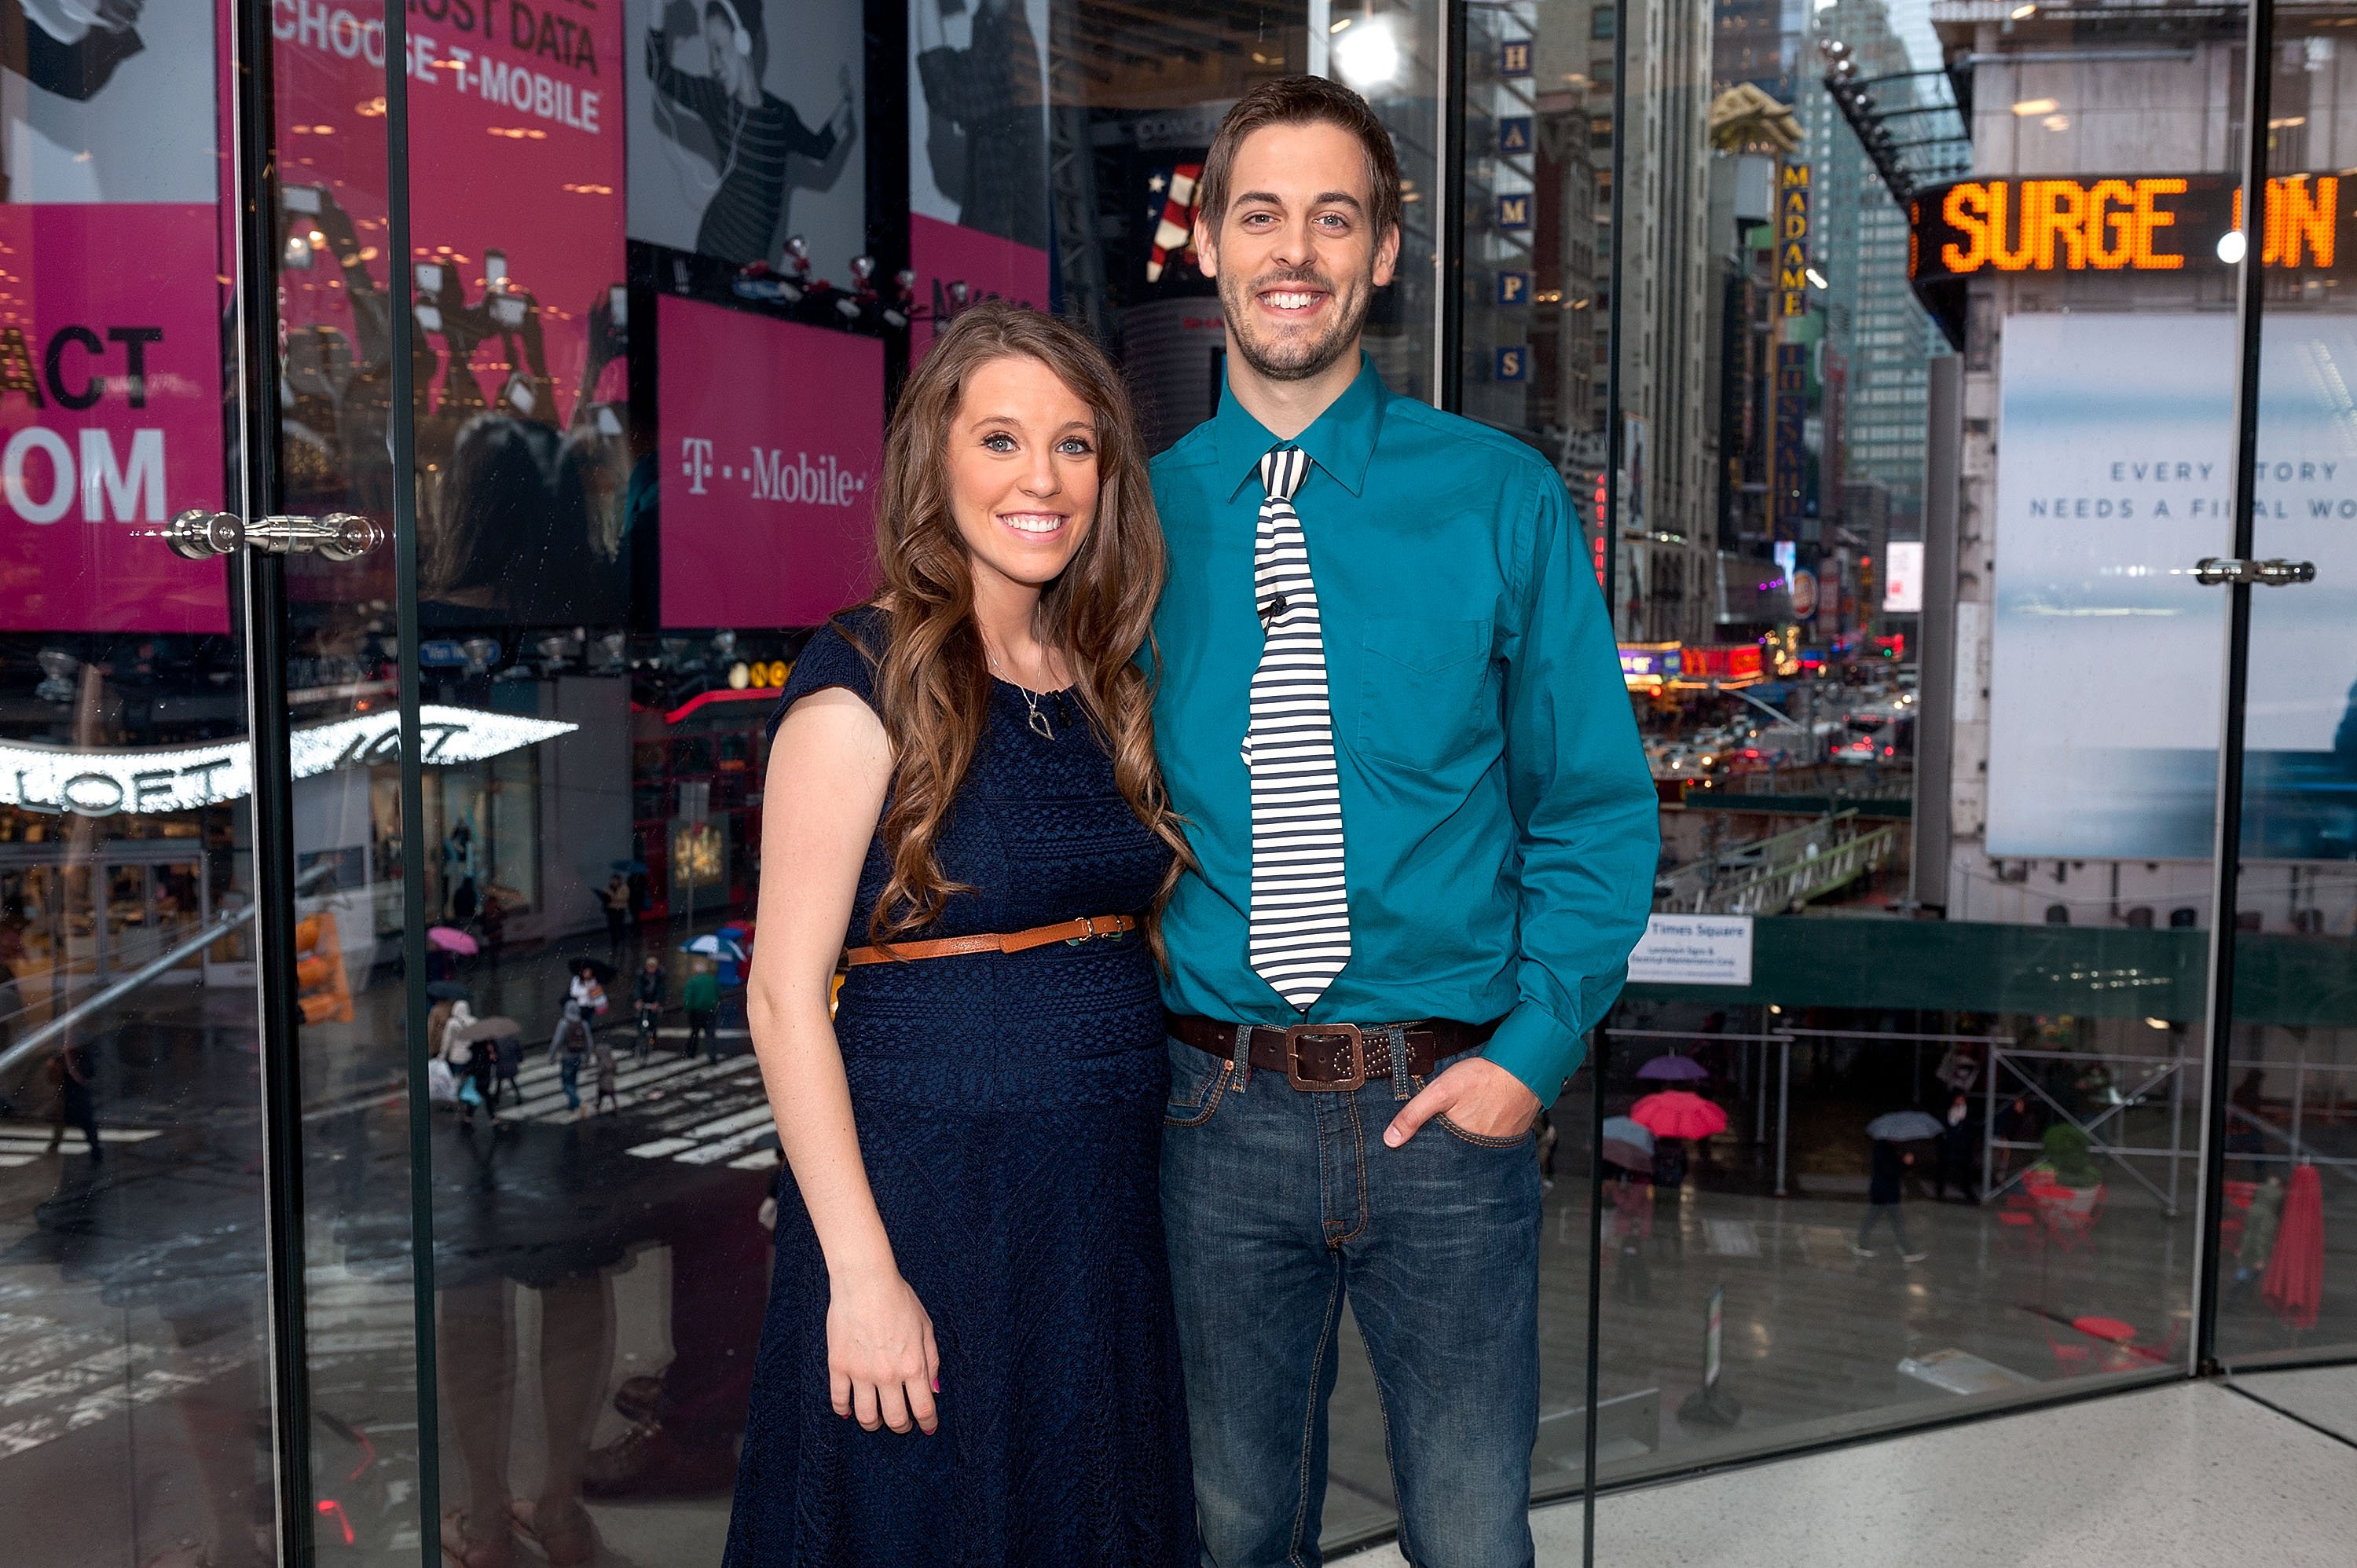 Derek Dillard and Jill Dugger visit "Extra" on October 23, 2014, in New York City. | Source: Getty Images.